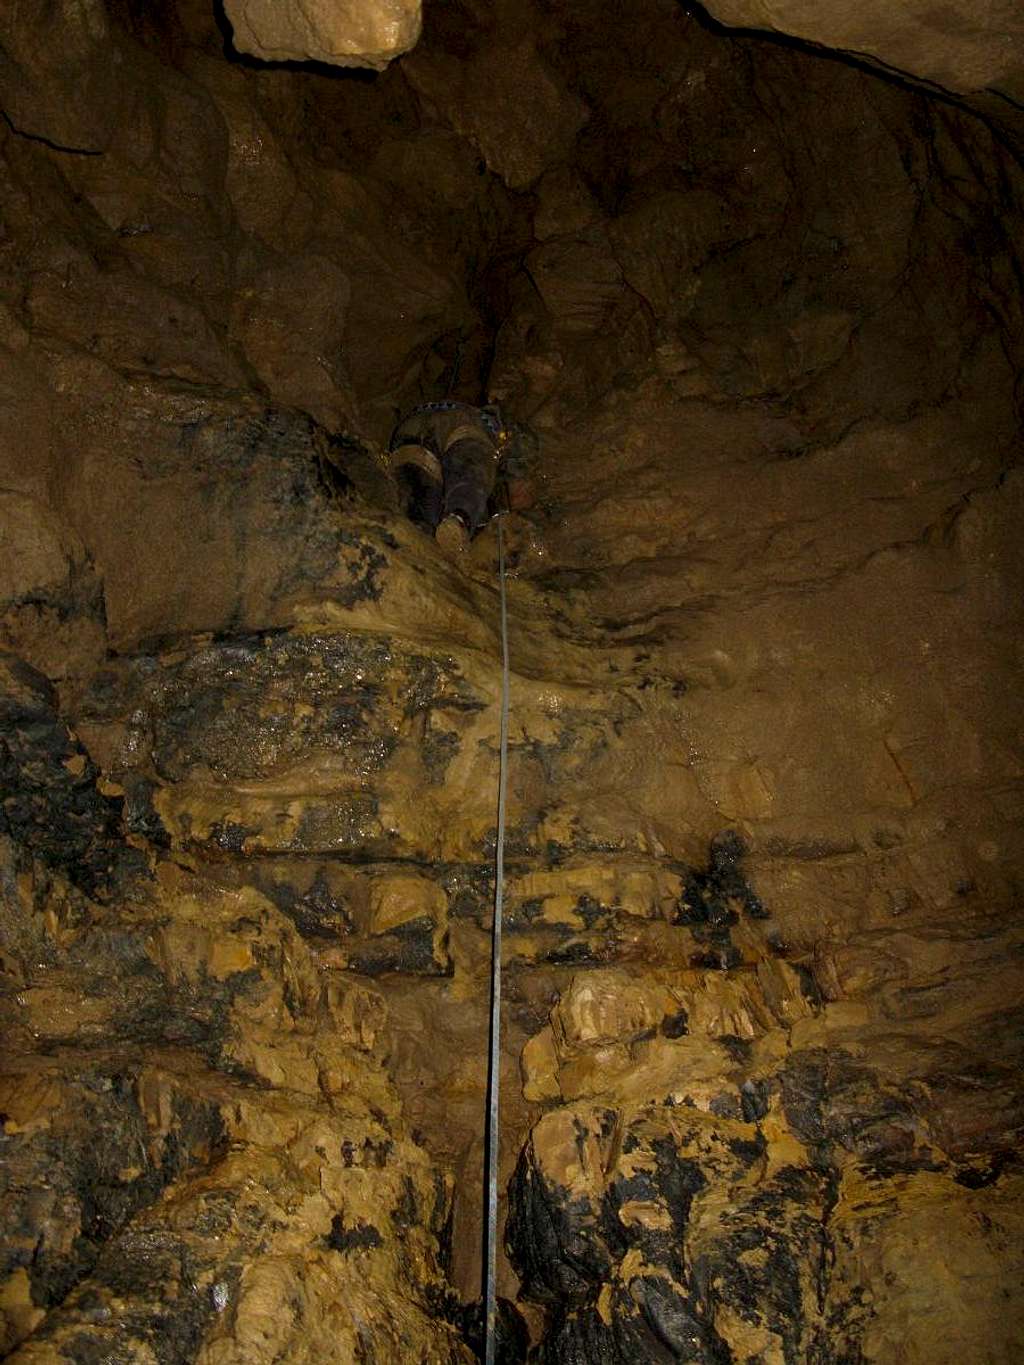 UnNamed Cave